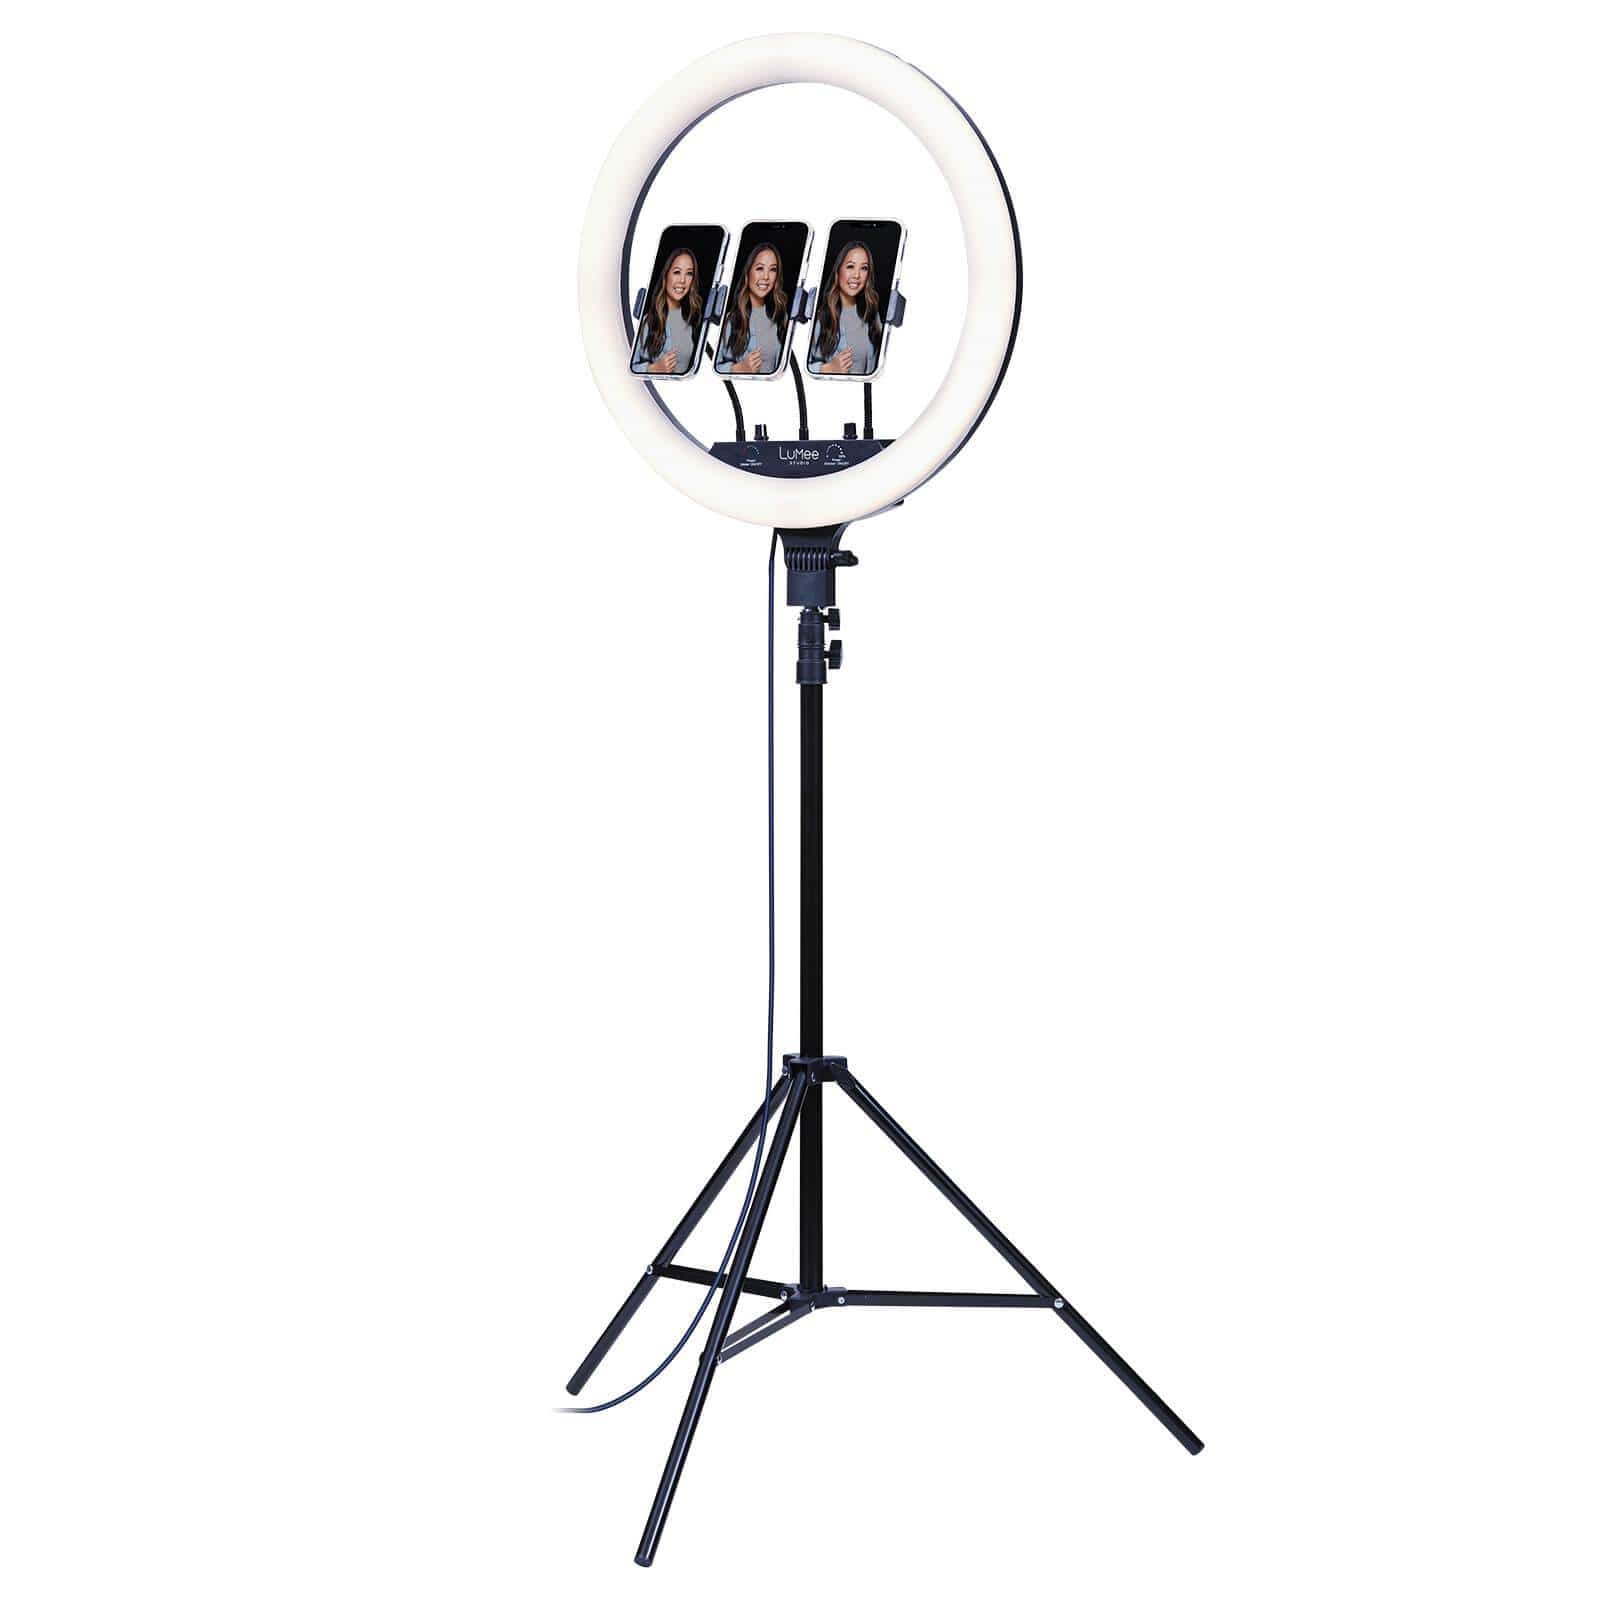 Ring Light on 18 Inch TriPod Stand with three phone holders